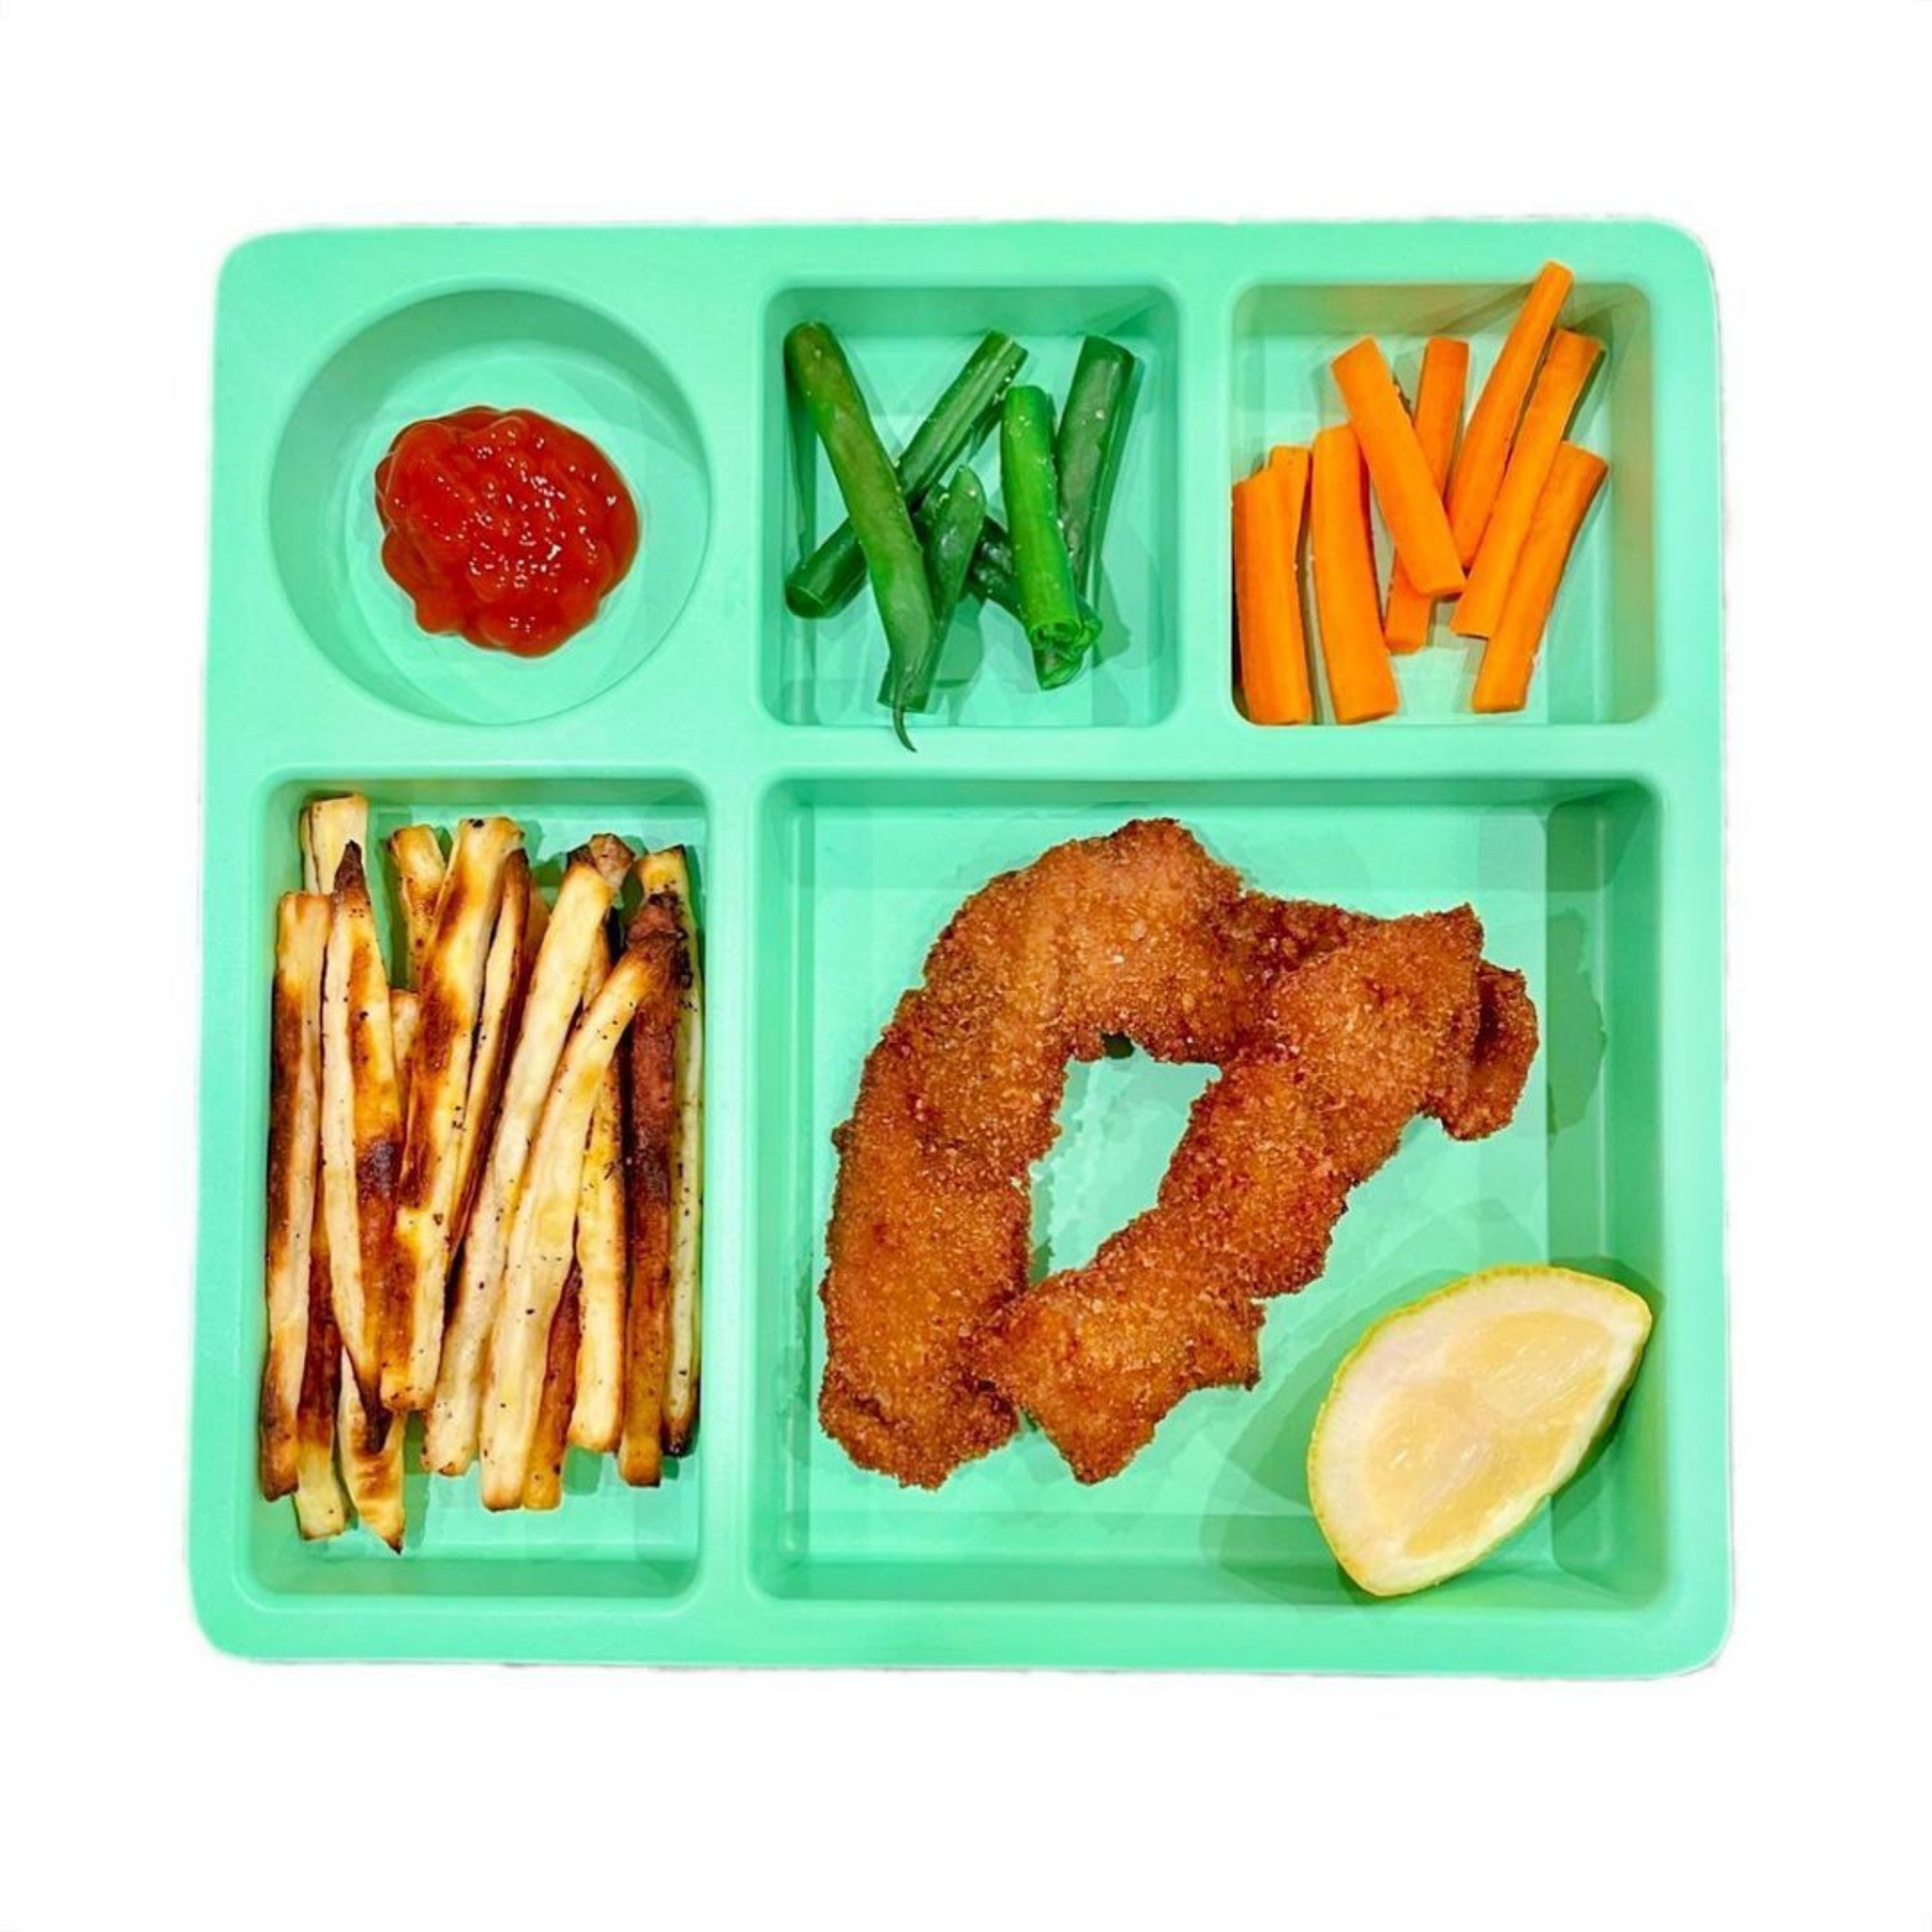 fried chicken and vegetables in compartments on a divided plate